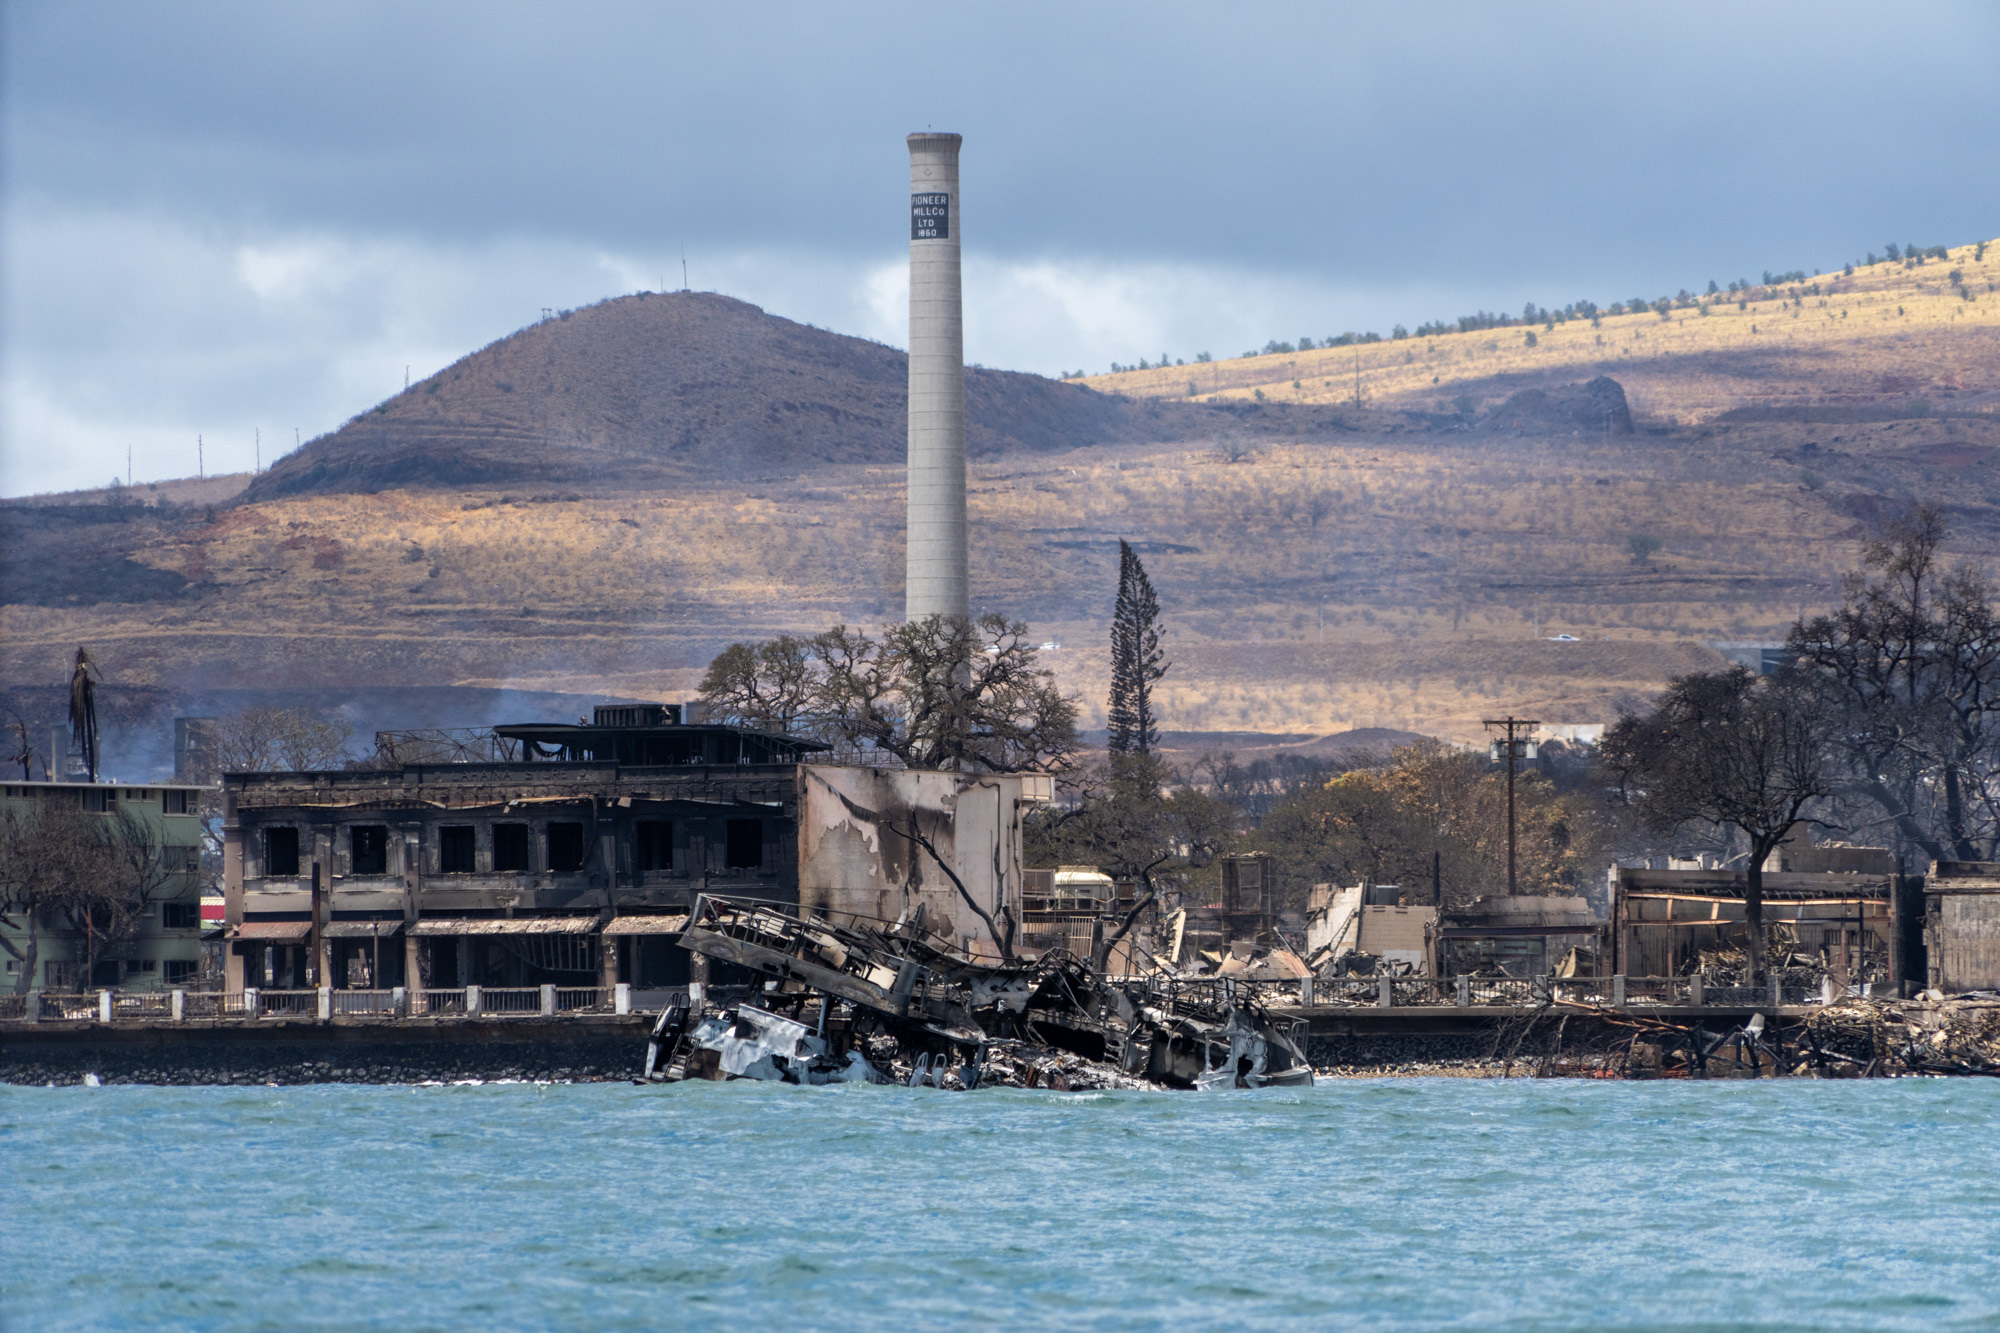 A waterfront view of buildings destroyed by the wildfires in Lahaina, Hawaii, on August 10.